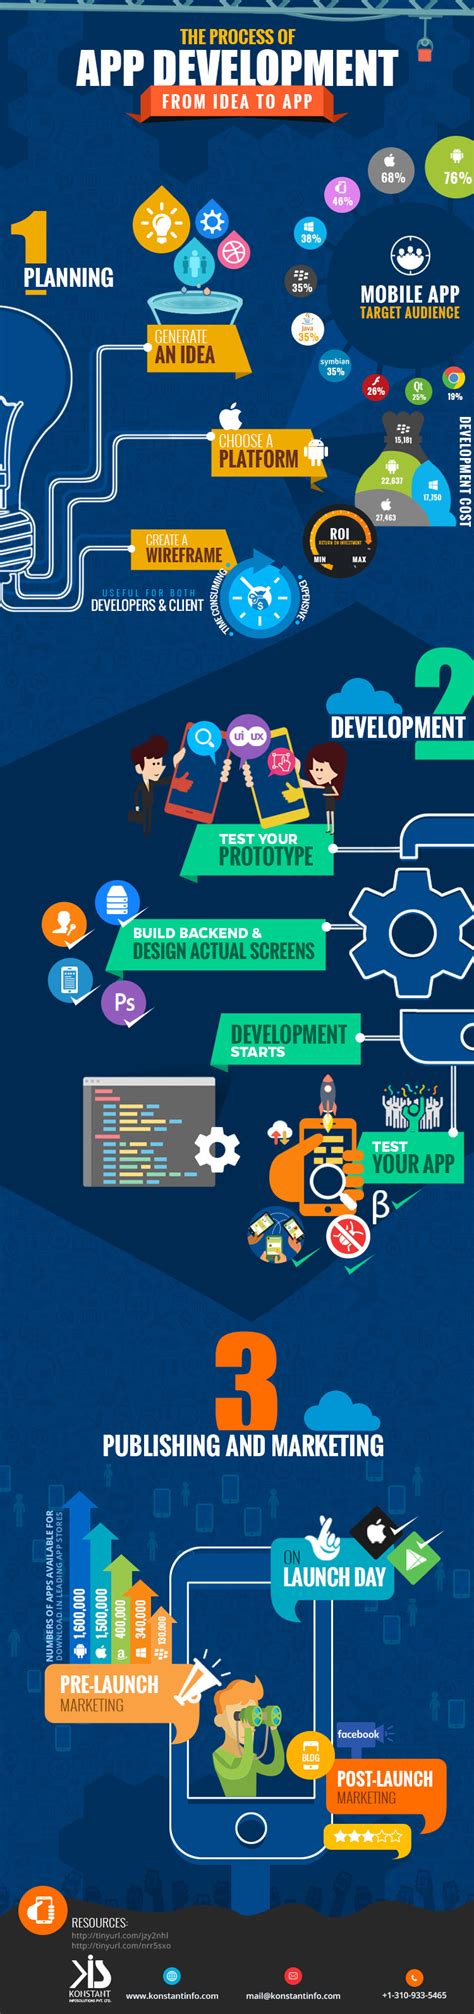 Infographic Mobile App Development Process From Idea To App